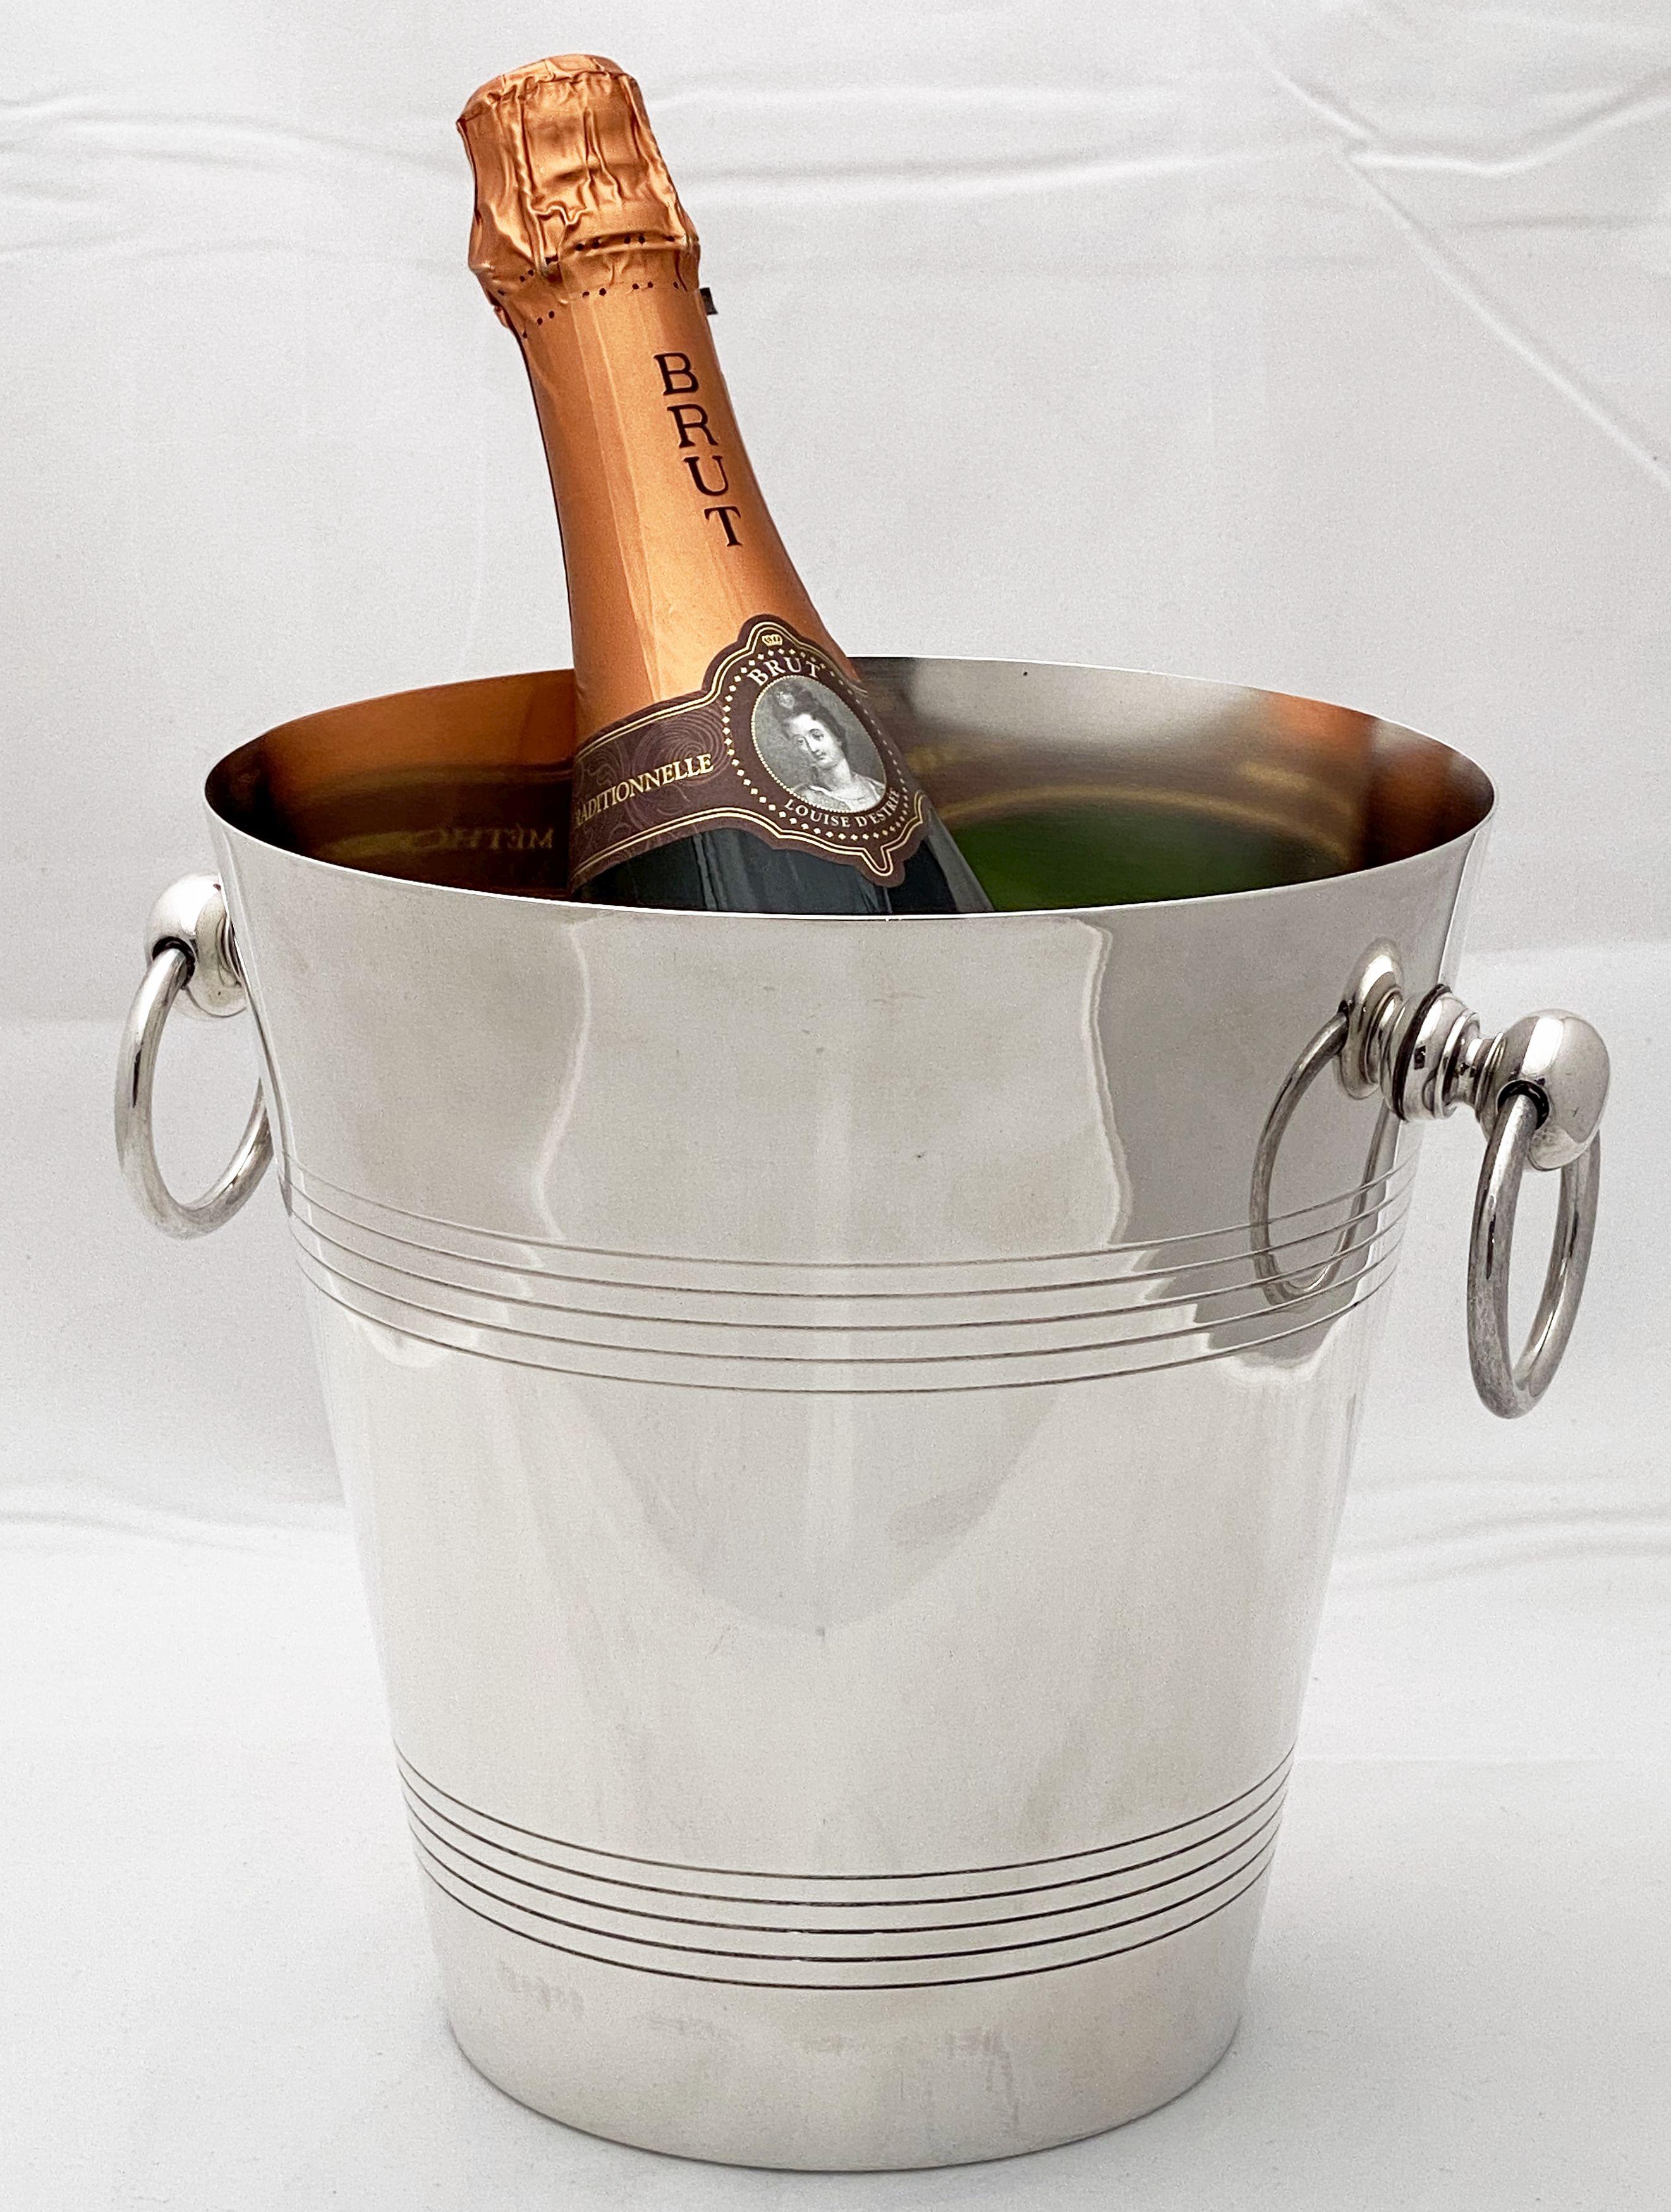 A fine Spanish champagne bucket or wine cooler of fine plate silver, featuring two stylish opposing ring handles, concentric circle design around the circumference, and an elegantly tapering body.

Impressed hallmarks on base.
   